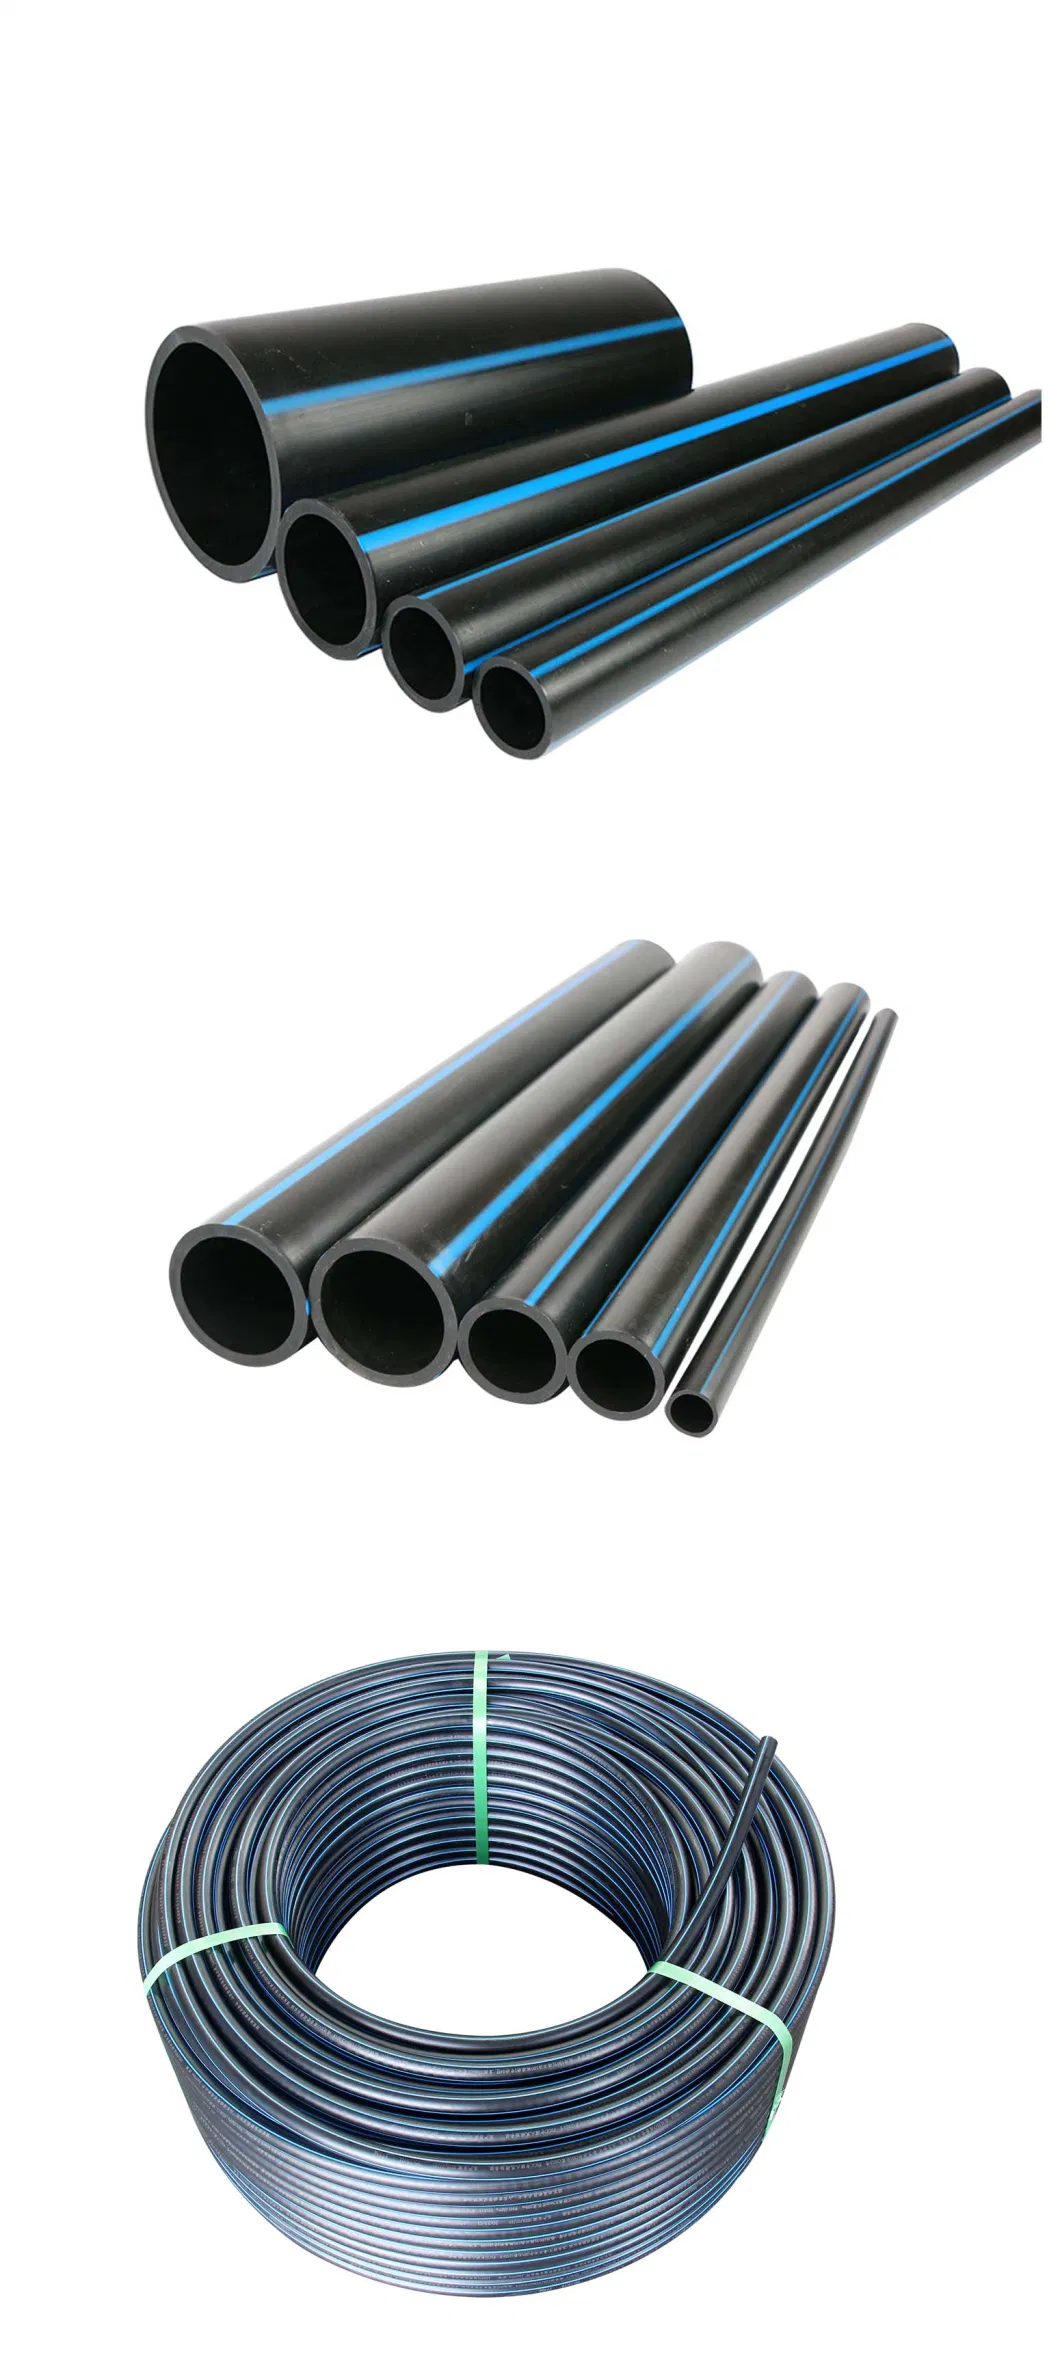 Wholsale Price Durable PE100 Water Pipe HDPE Pipe for Water Gas Sewer Mains Slurry Irrigation HDPE